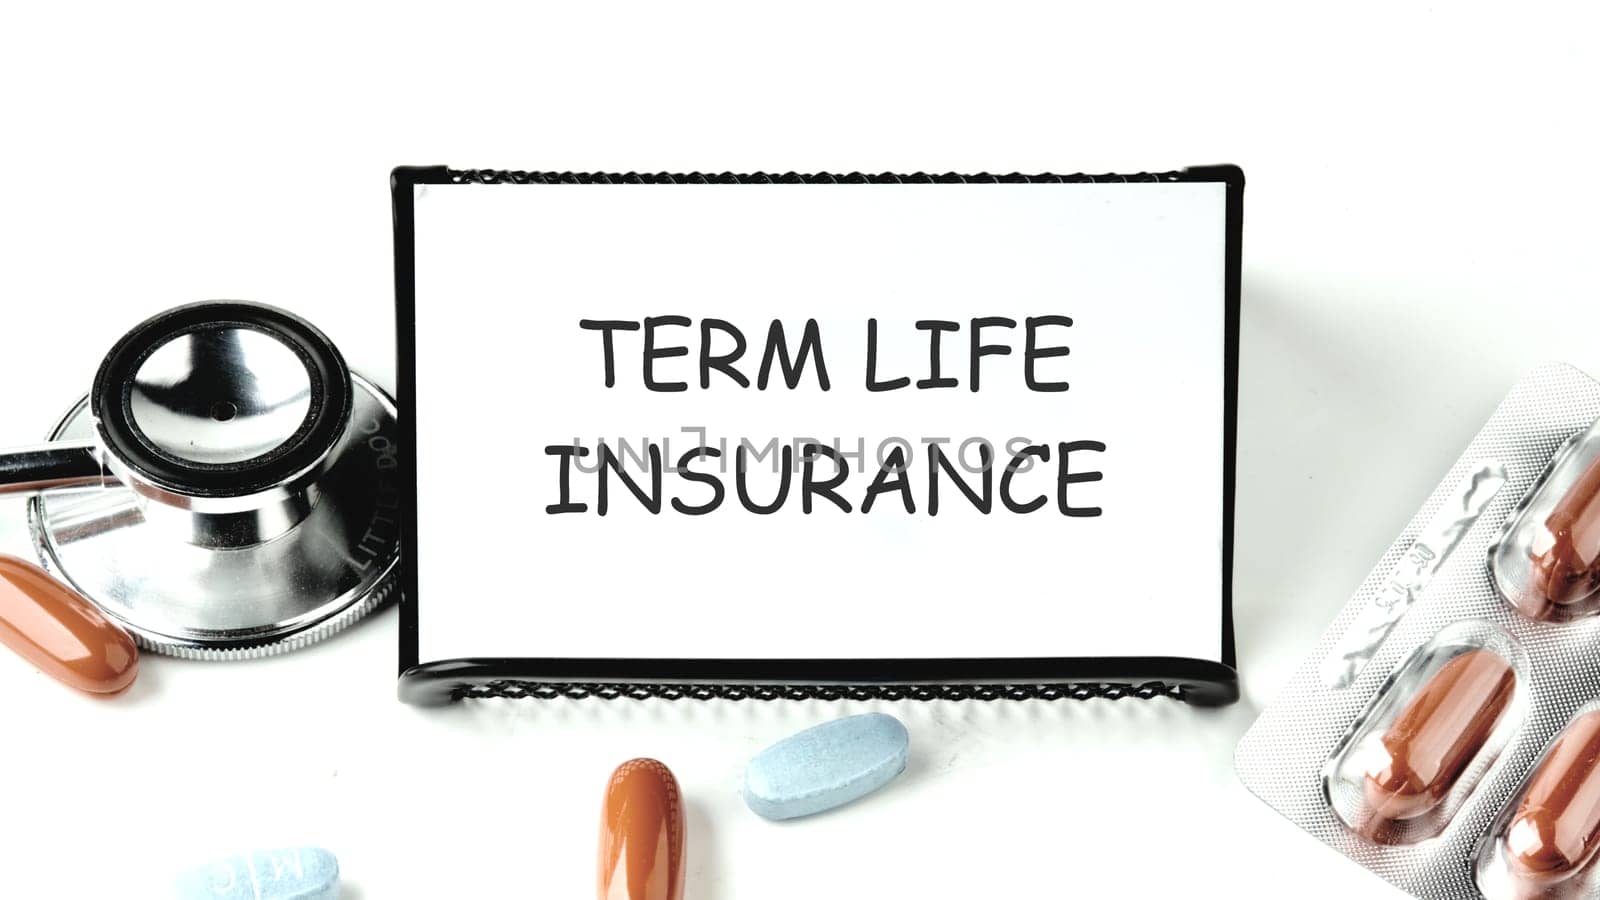 Medical concept. TERM LIFE INSURANCE on a business card on a stand on a white background next to pills, medicines